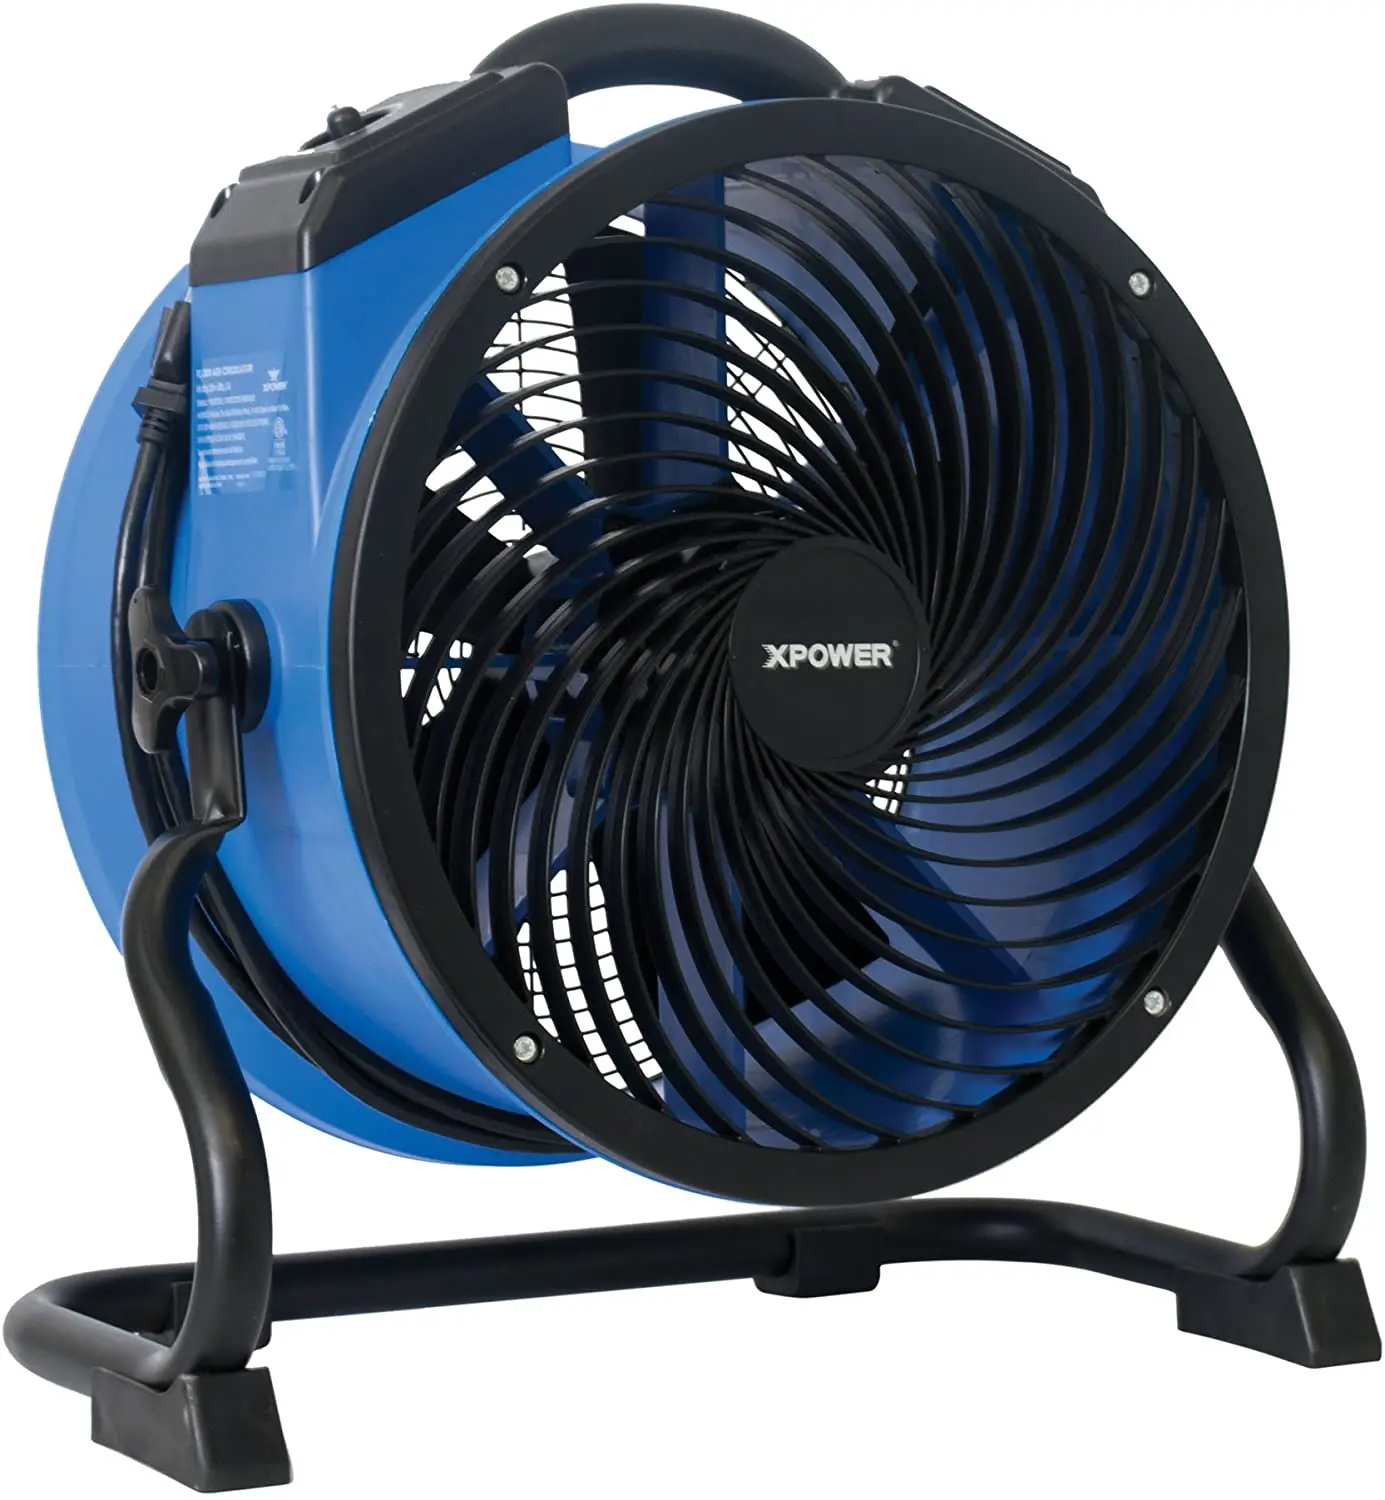 

FC-300 Heavy Duty Industrial High Velocity Whole Room Air Mover Air Circulator Utility Shop Floor Fan, Variable Speed, Timer, 14